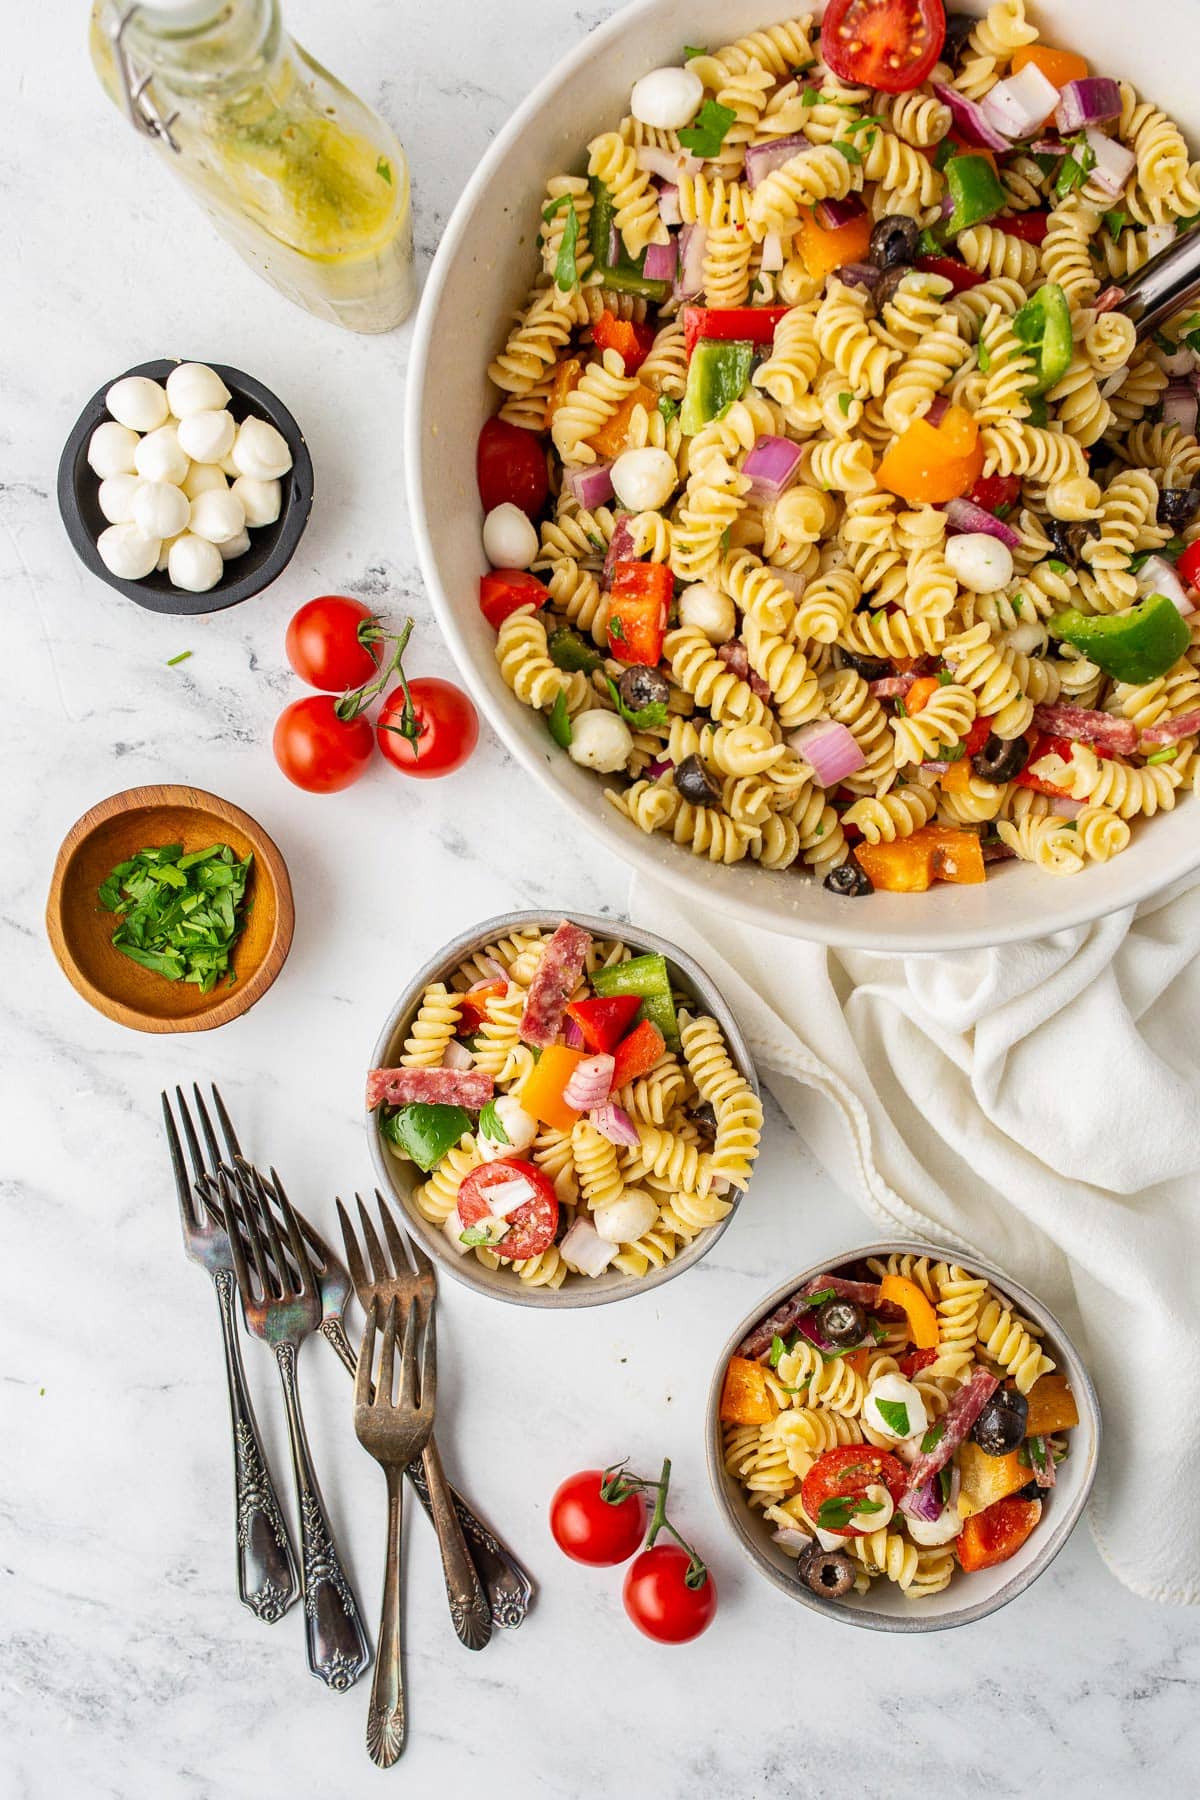 Italian pasta salad in several white bowls surrounded by tomatoes on the vine, chopped parsley, mozzarella balls and dressing.